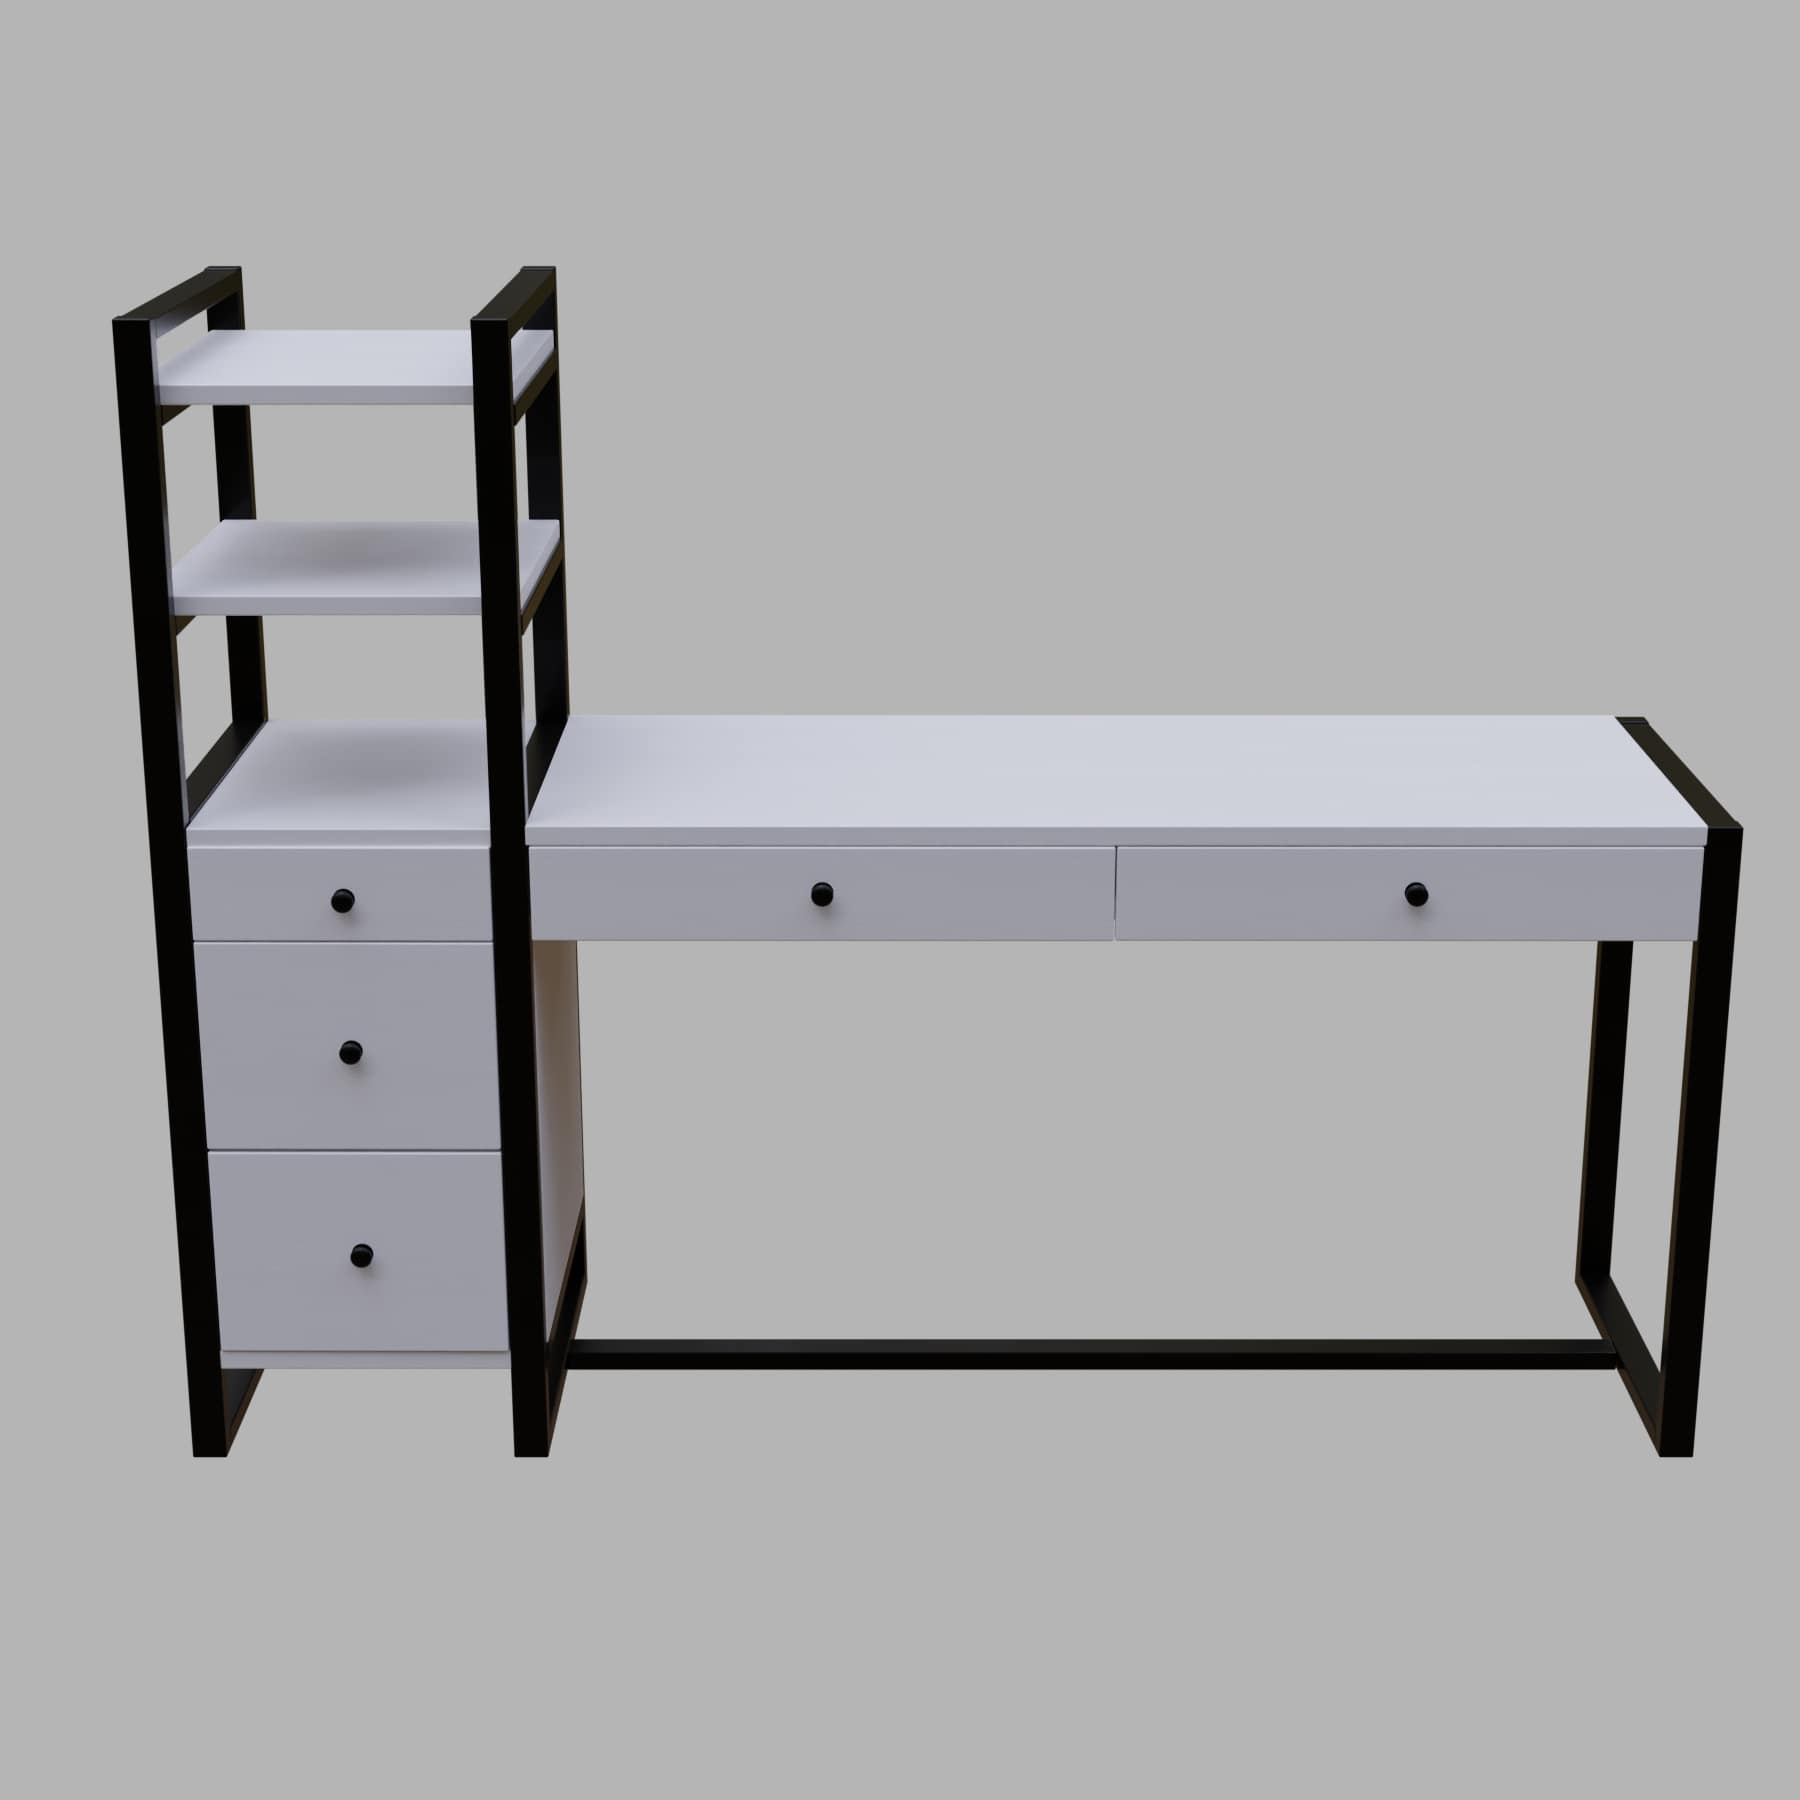 Rubi Study Table with drawers & storage shelves in white finish